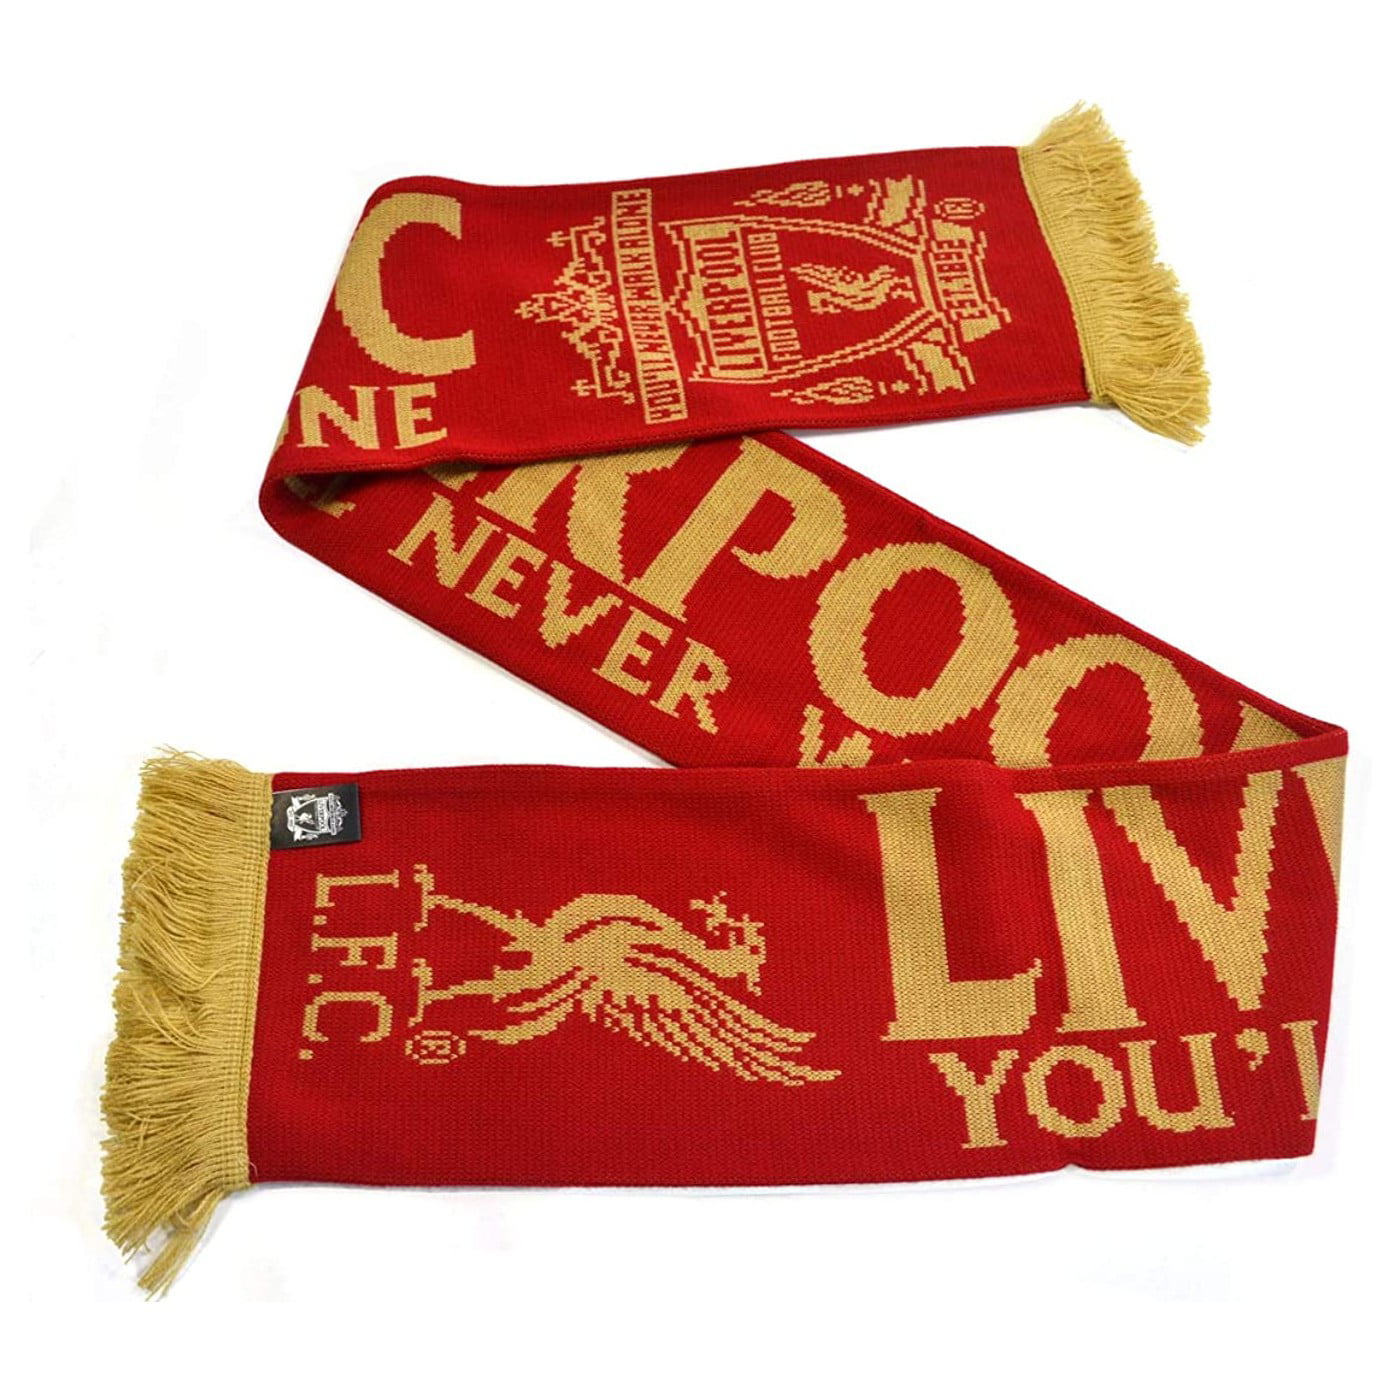 LIVERPOOL FC OFFICIAL YNWA Scarf Classic  Red/wht/Grn 